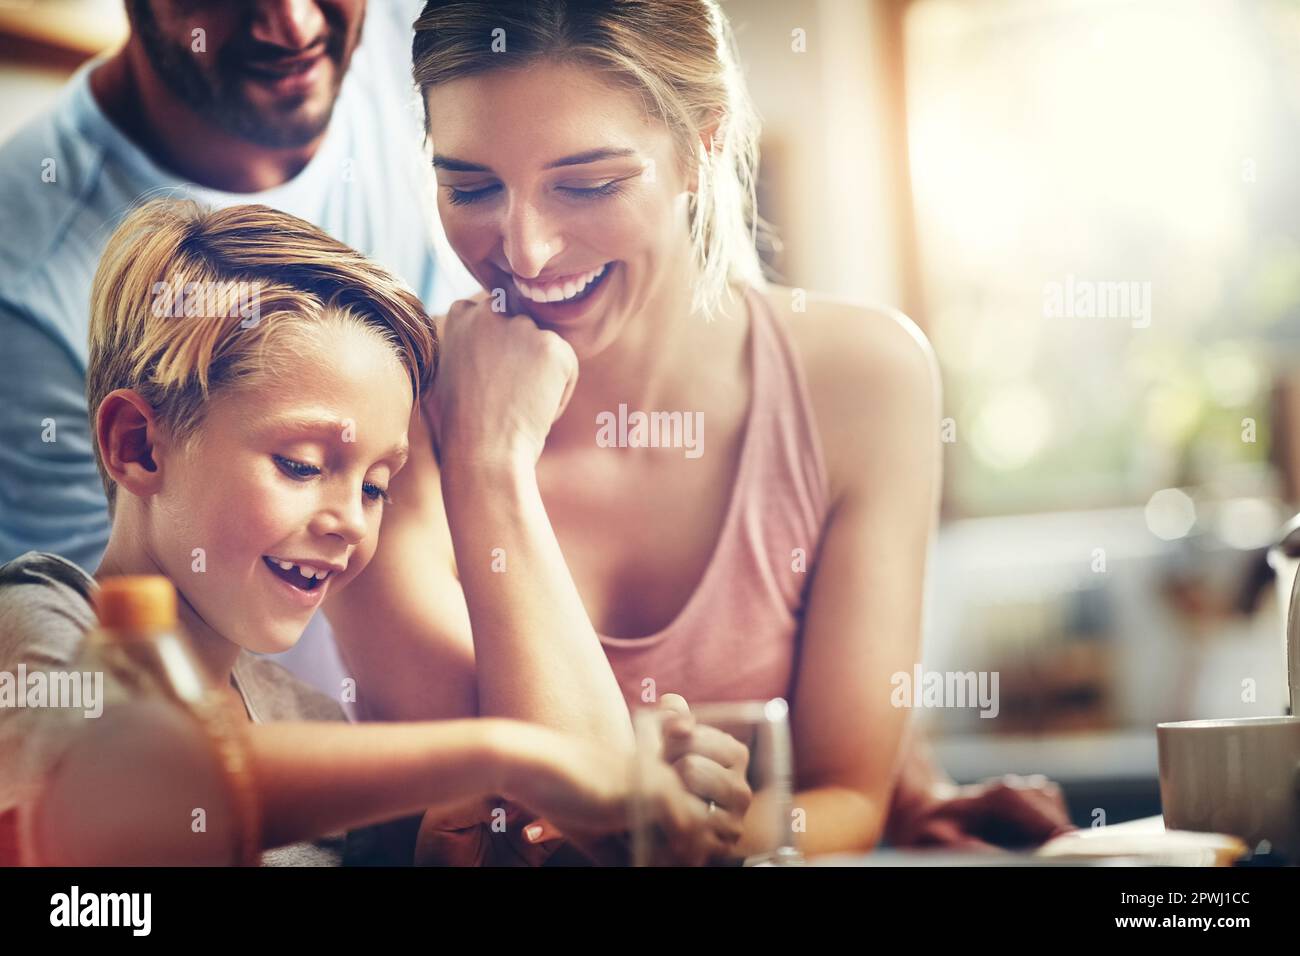 Nothing can amount to the joy family brings. a woman sitting with her son while hes having breakfast. Stock Photo